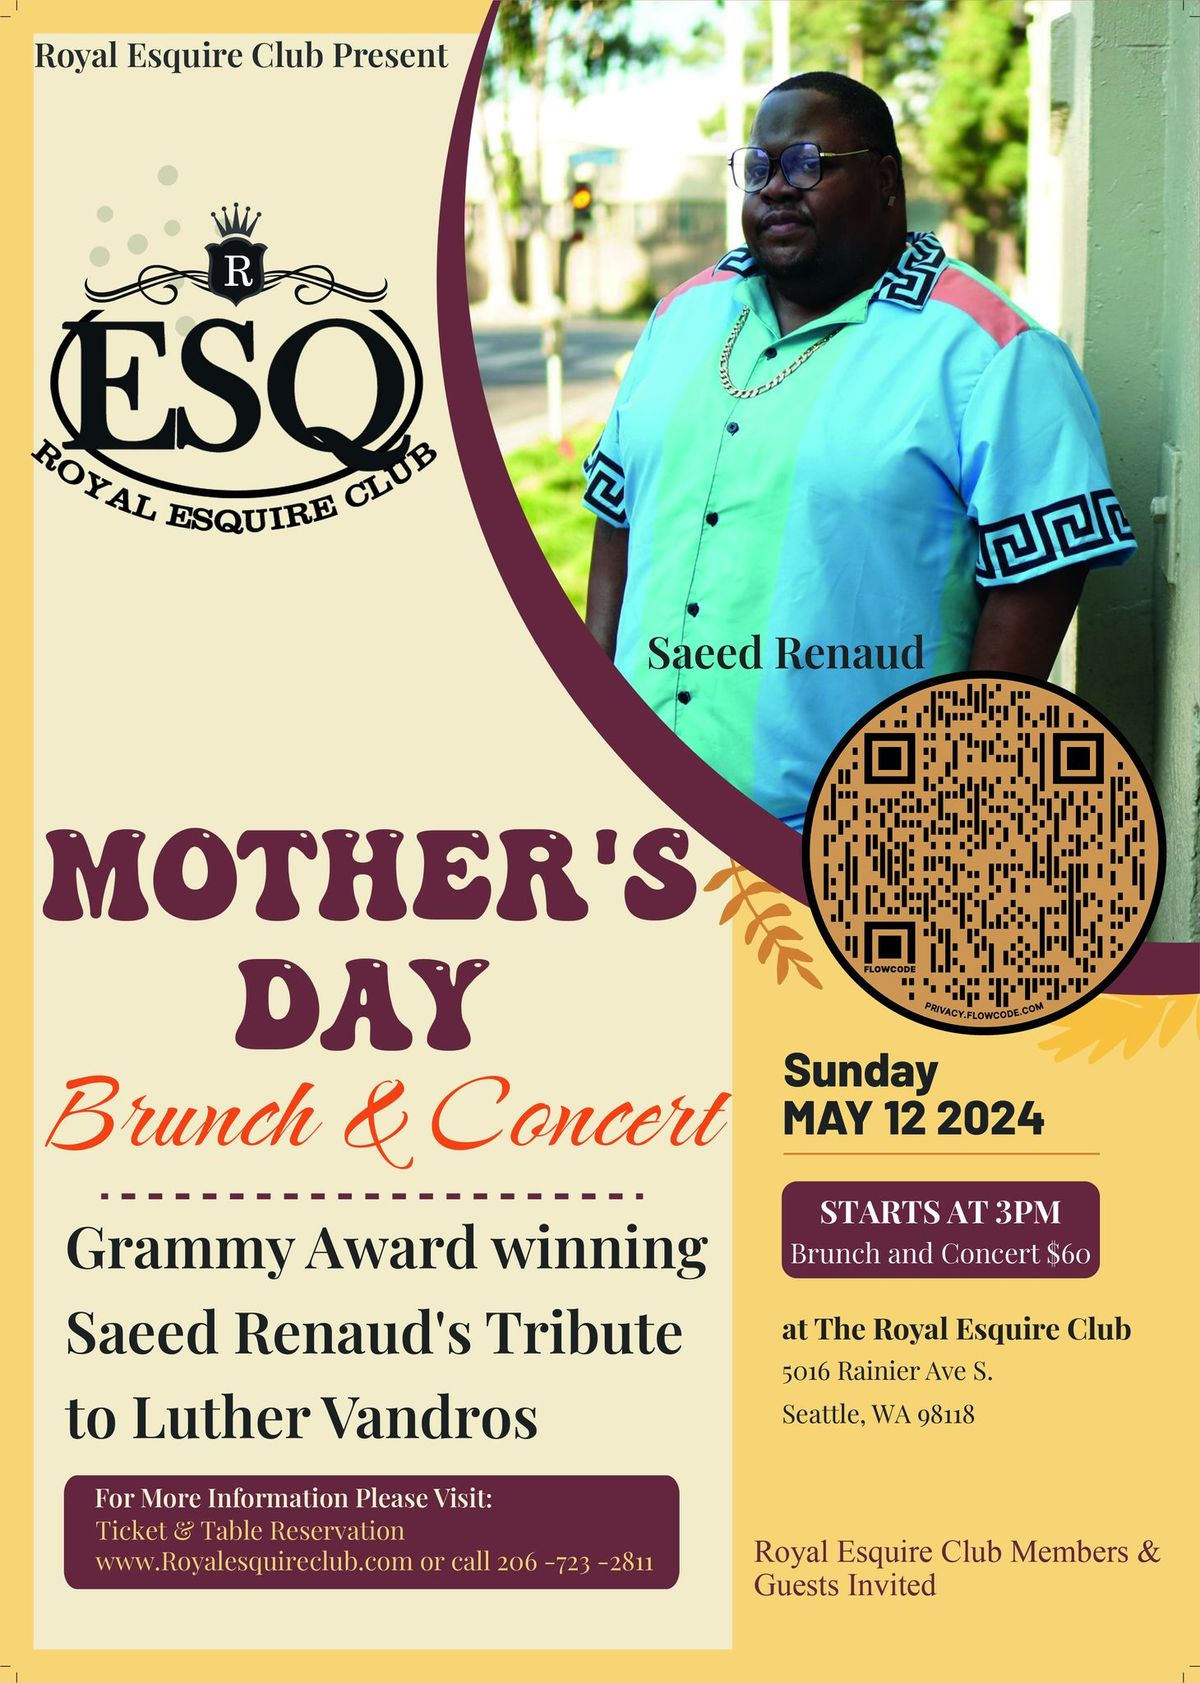 Mother's Day Brunch & Concert with Saeed Renaud